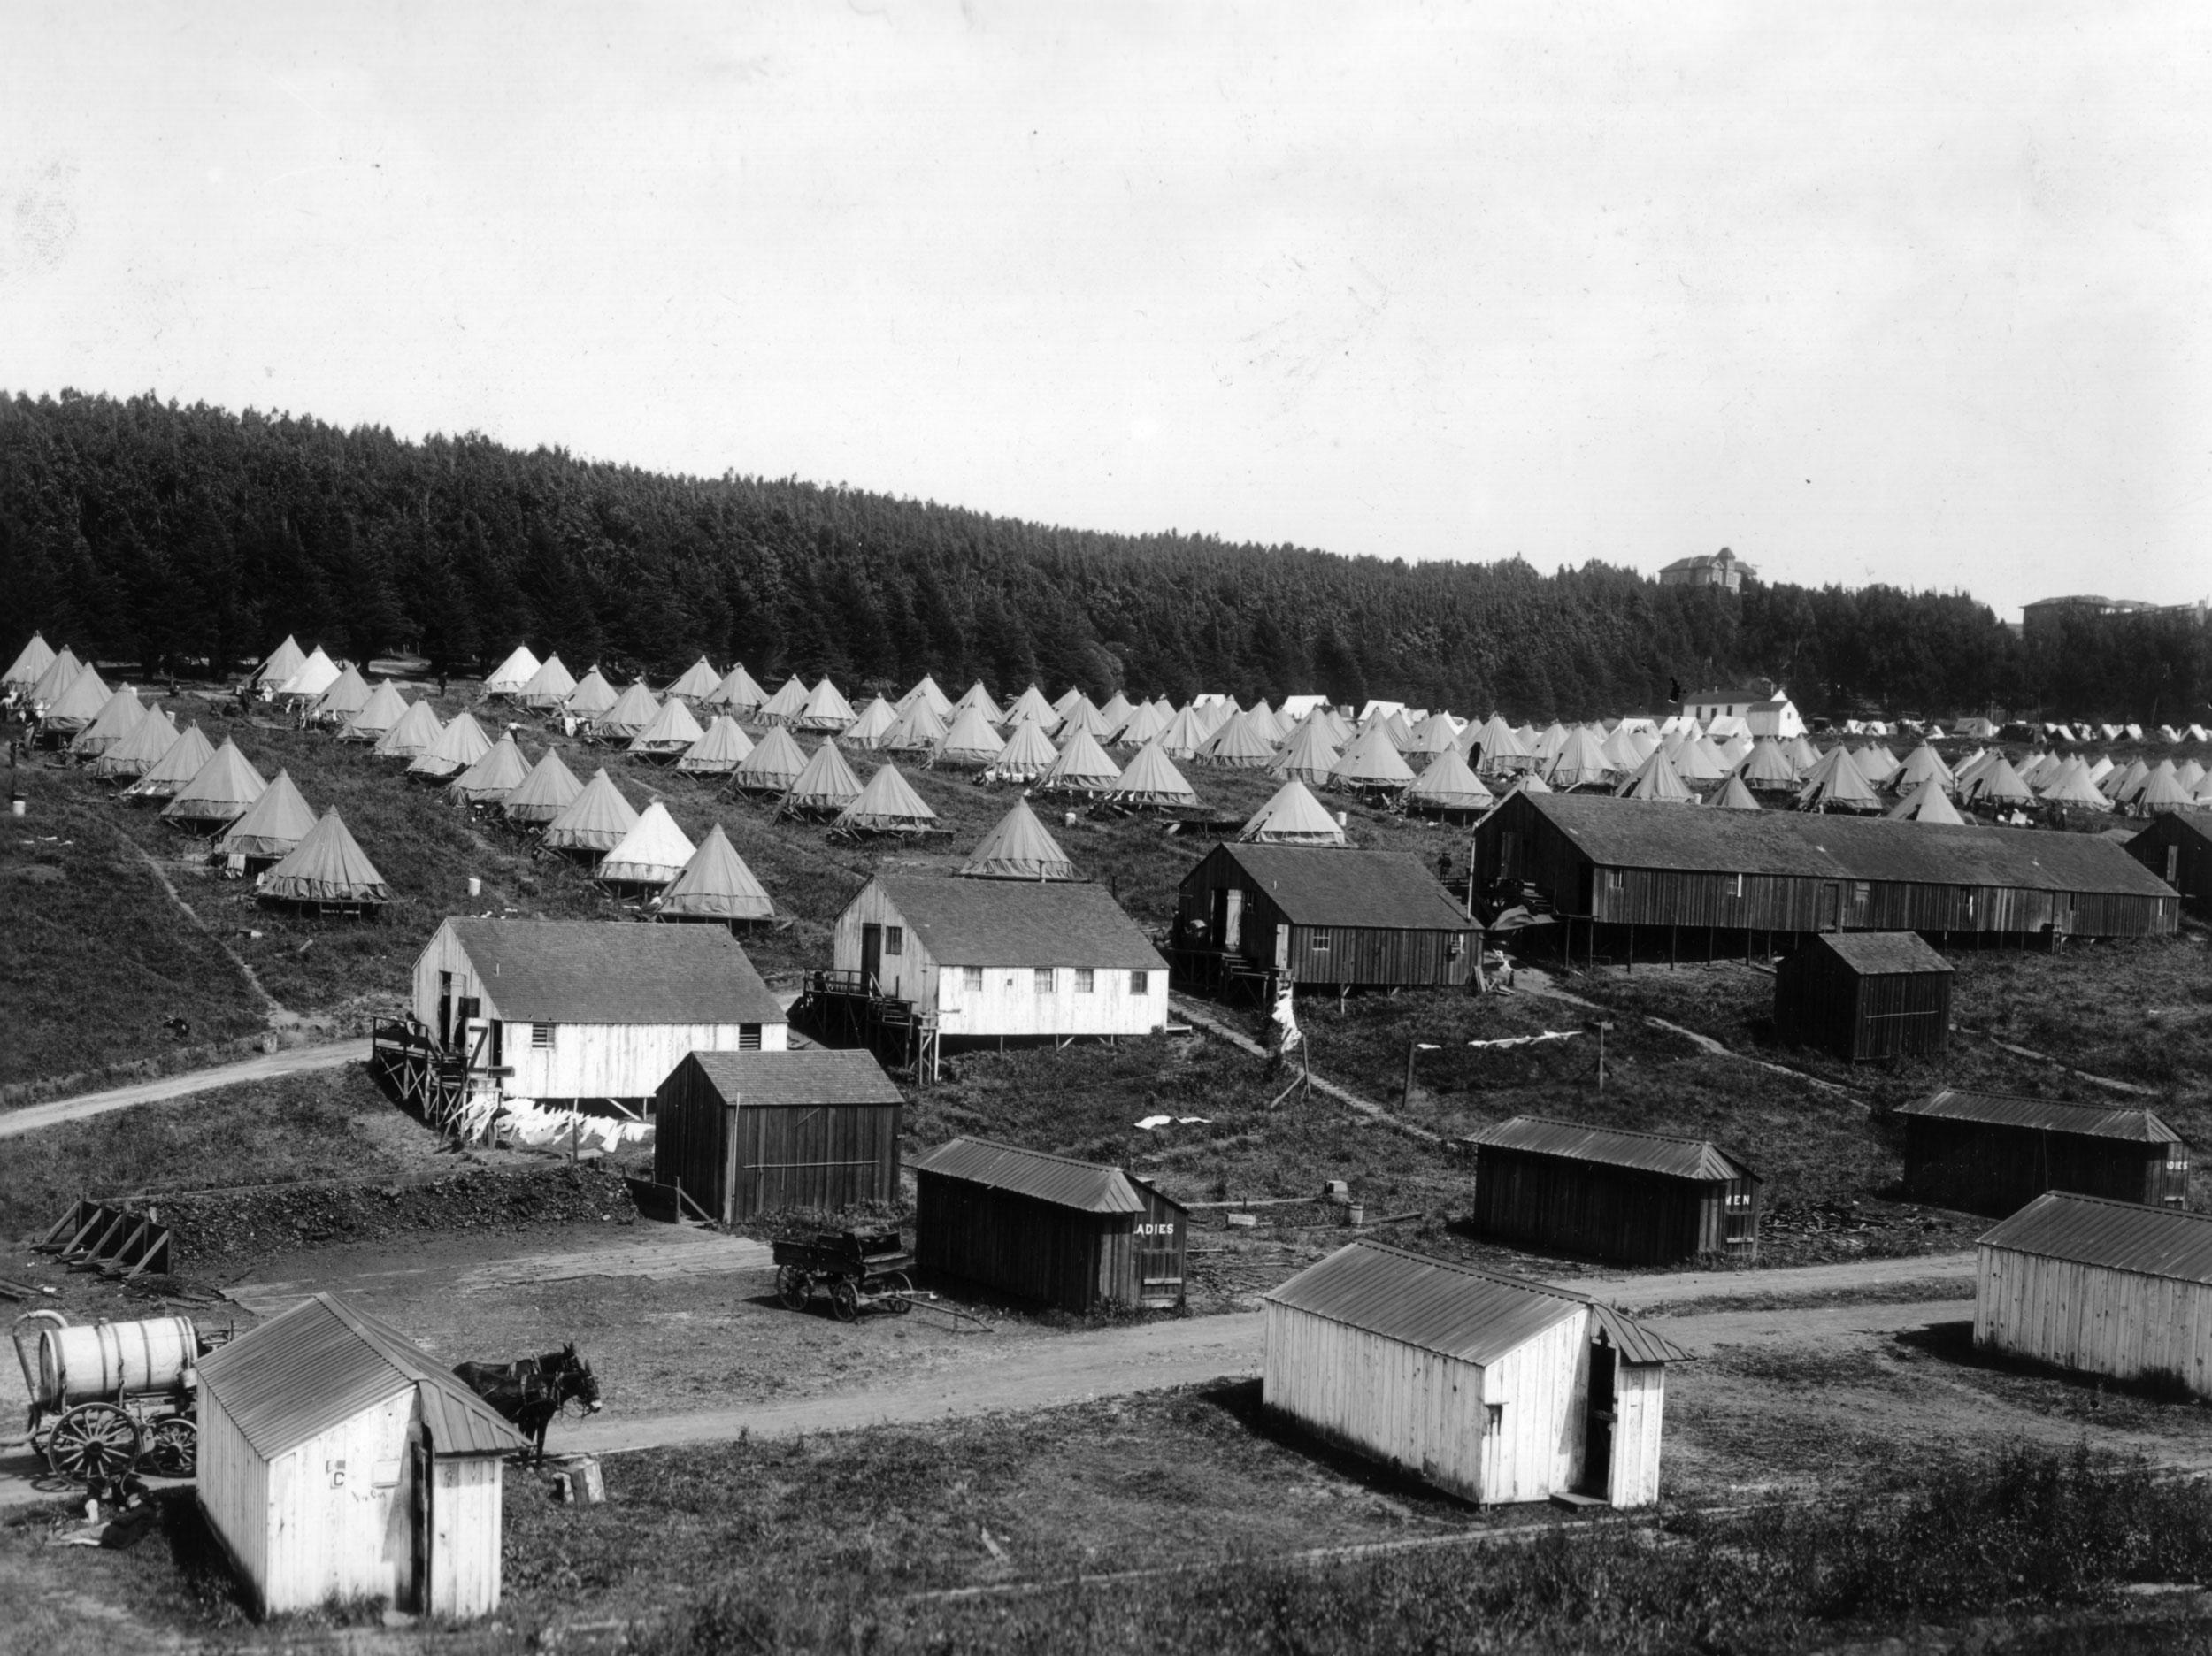 Buildings and tents at the refugee camp in Tennessee Hollow